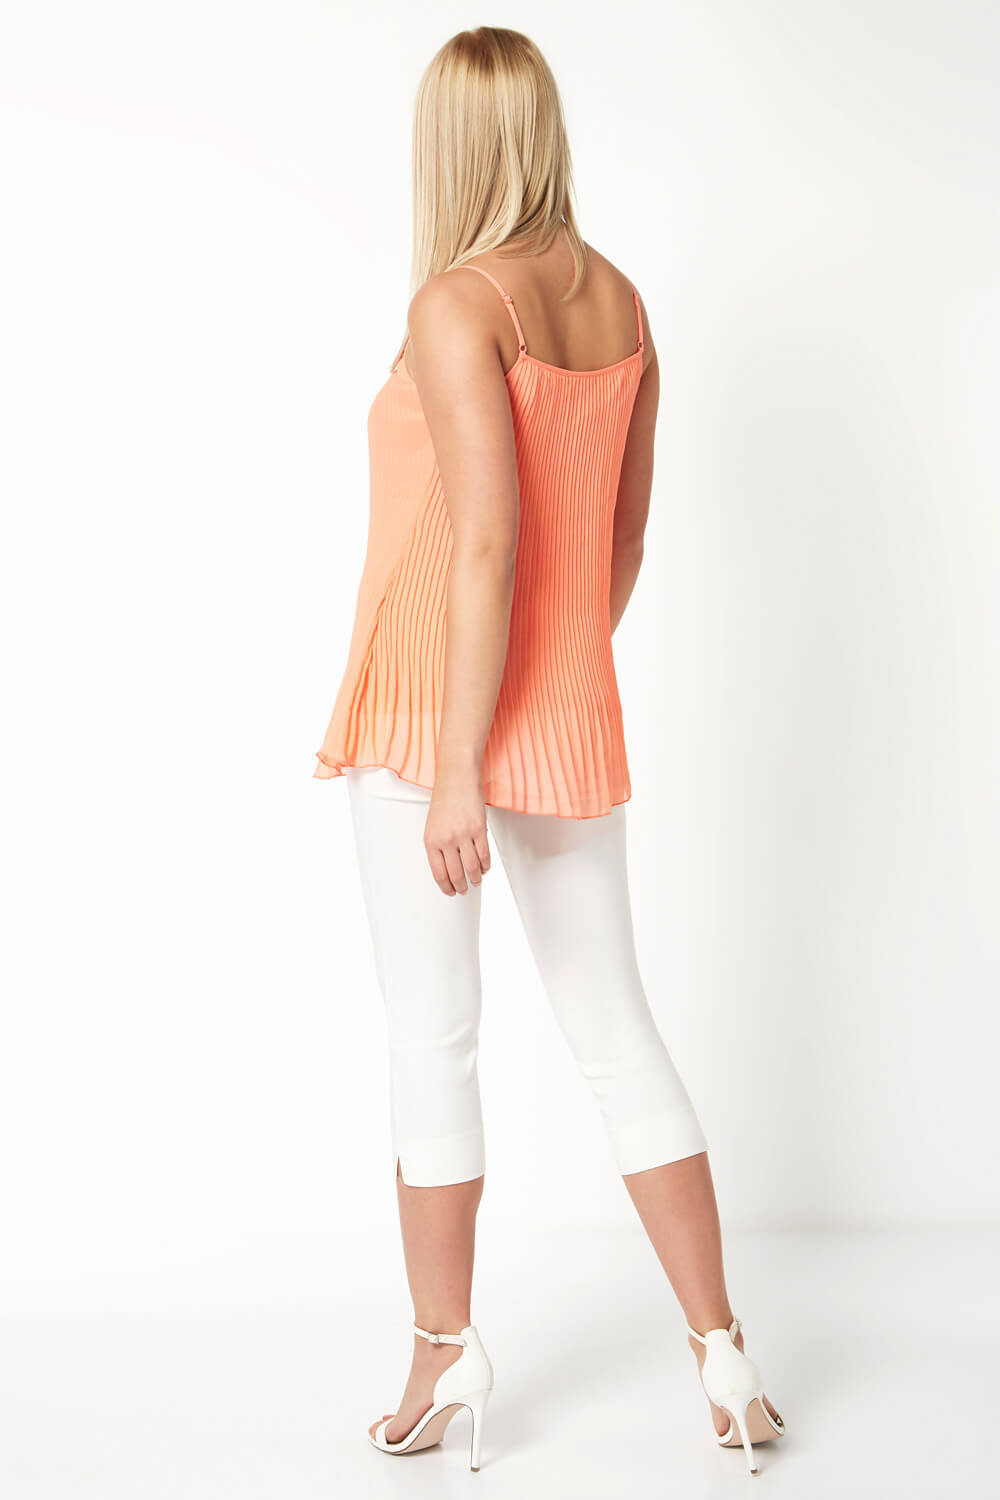 CORAL Pleated Lace Trim Cami Top, Image 3 of 5